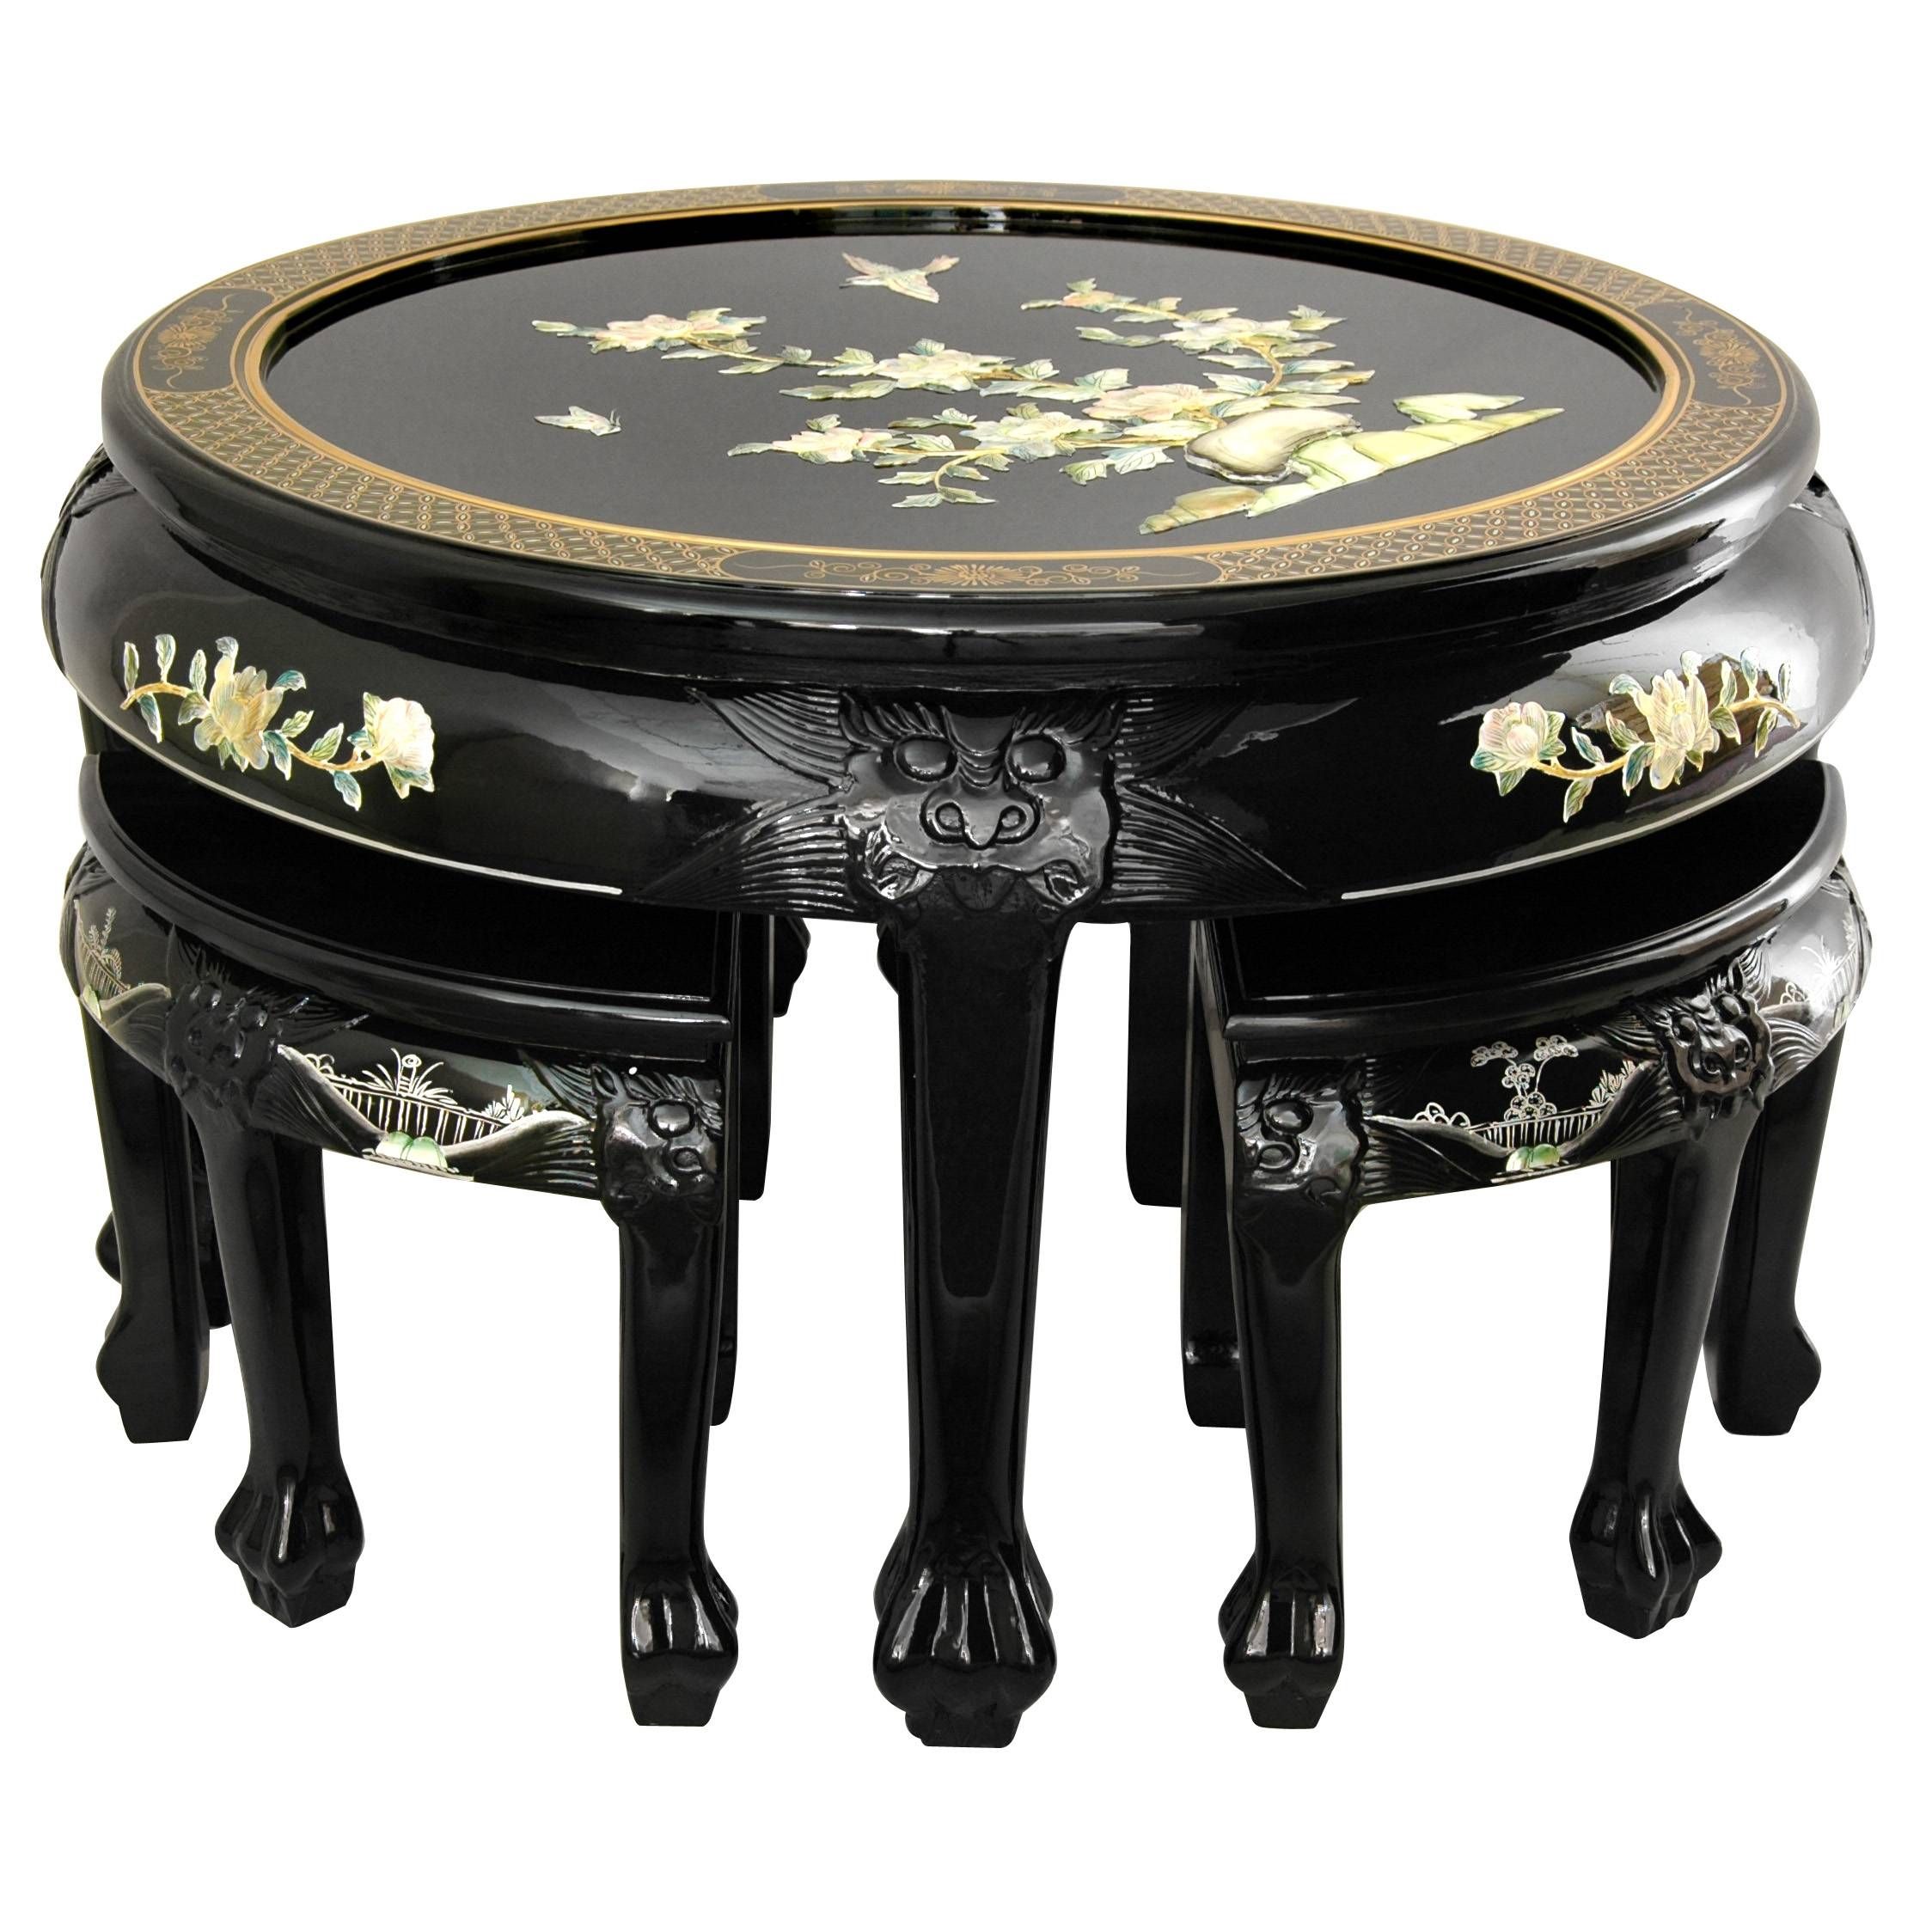 Buy Black Lacquer Mother Of Pearl Round Coffee Table W/ Four Intended For Coffee Table With Stools (View 28 of 30)